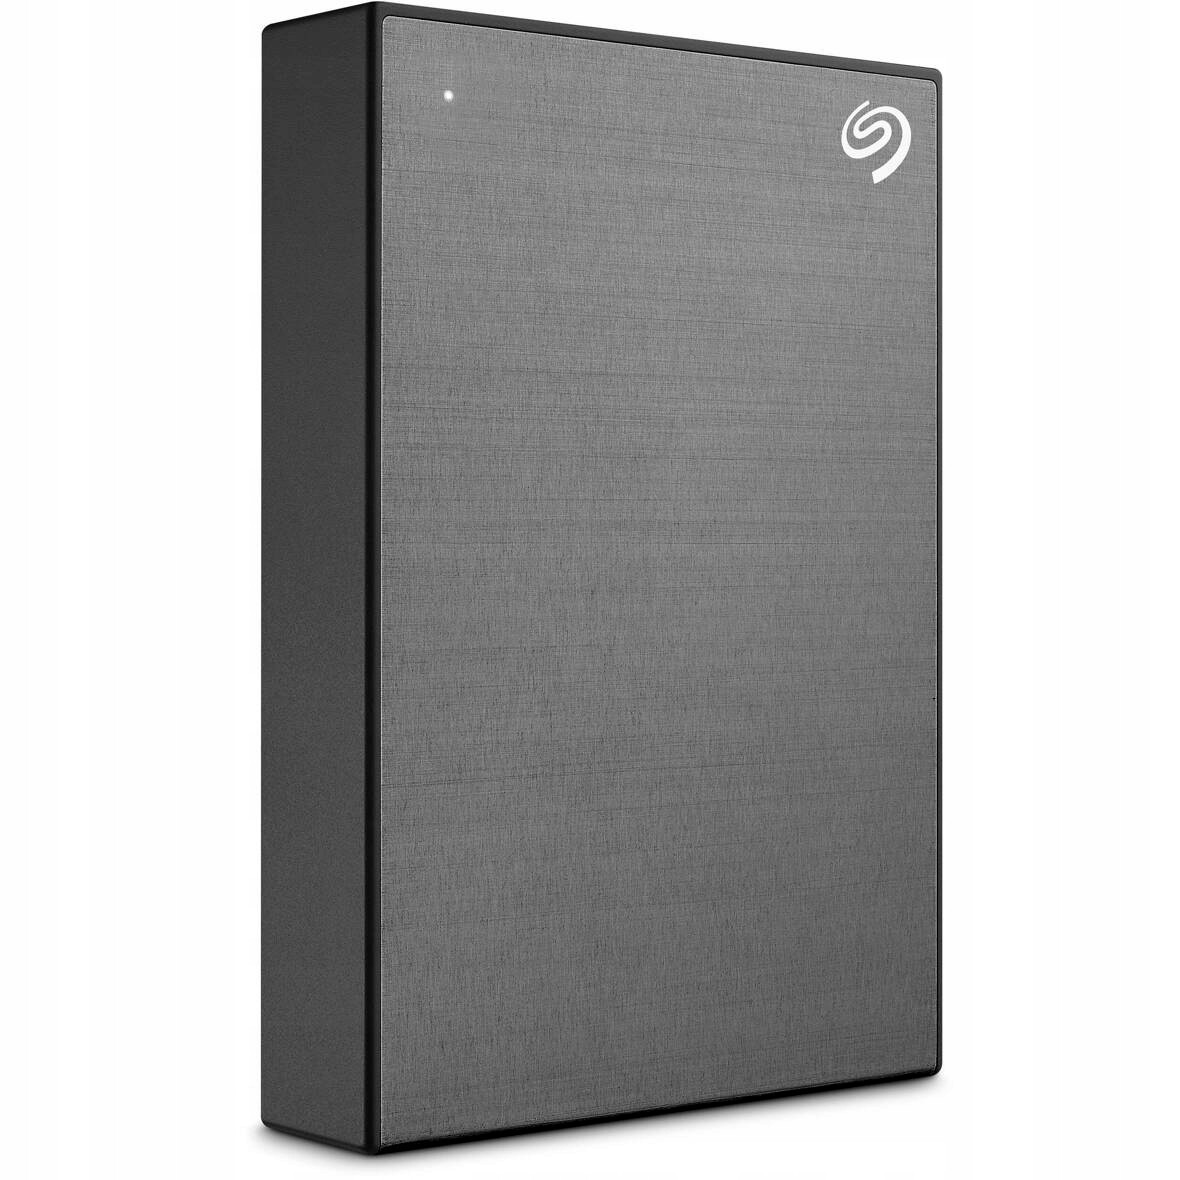 Přenosný Hdd disk Seagate One Touch With Password 2TB Usb 3.0 STKY2000404